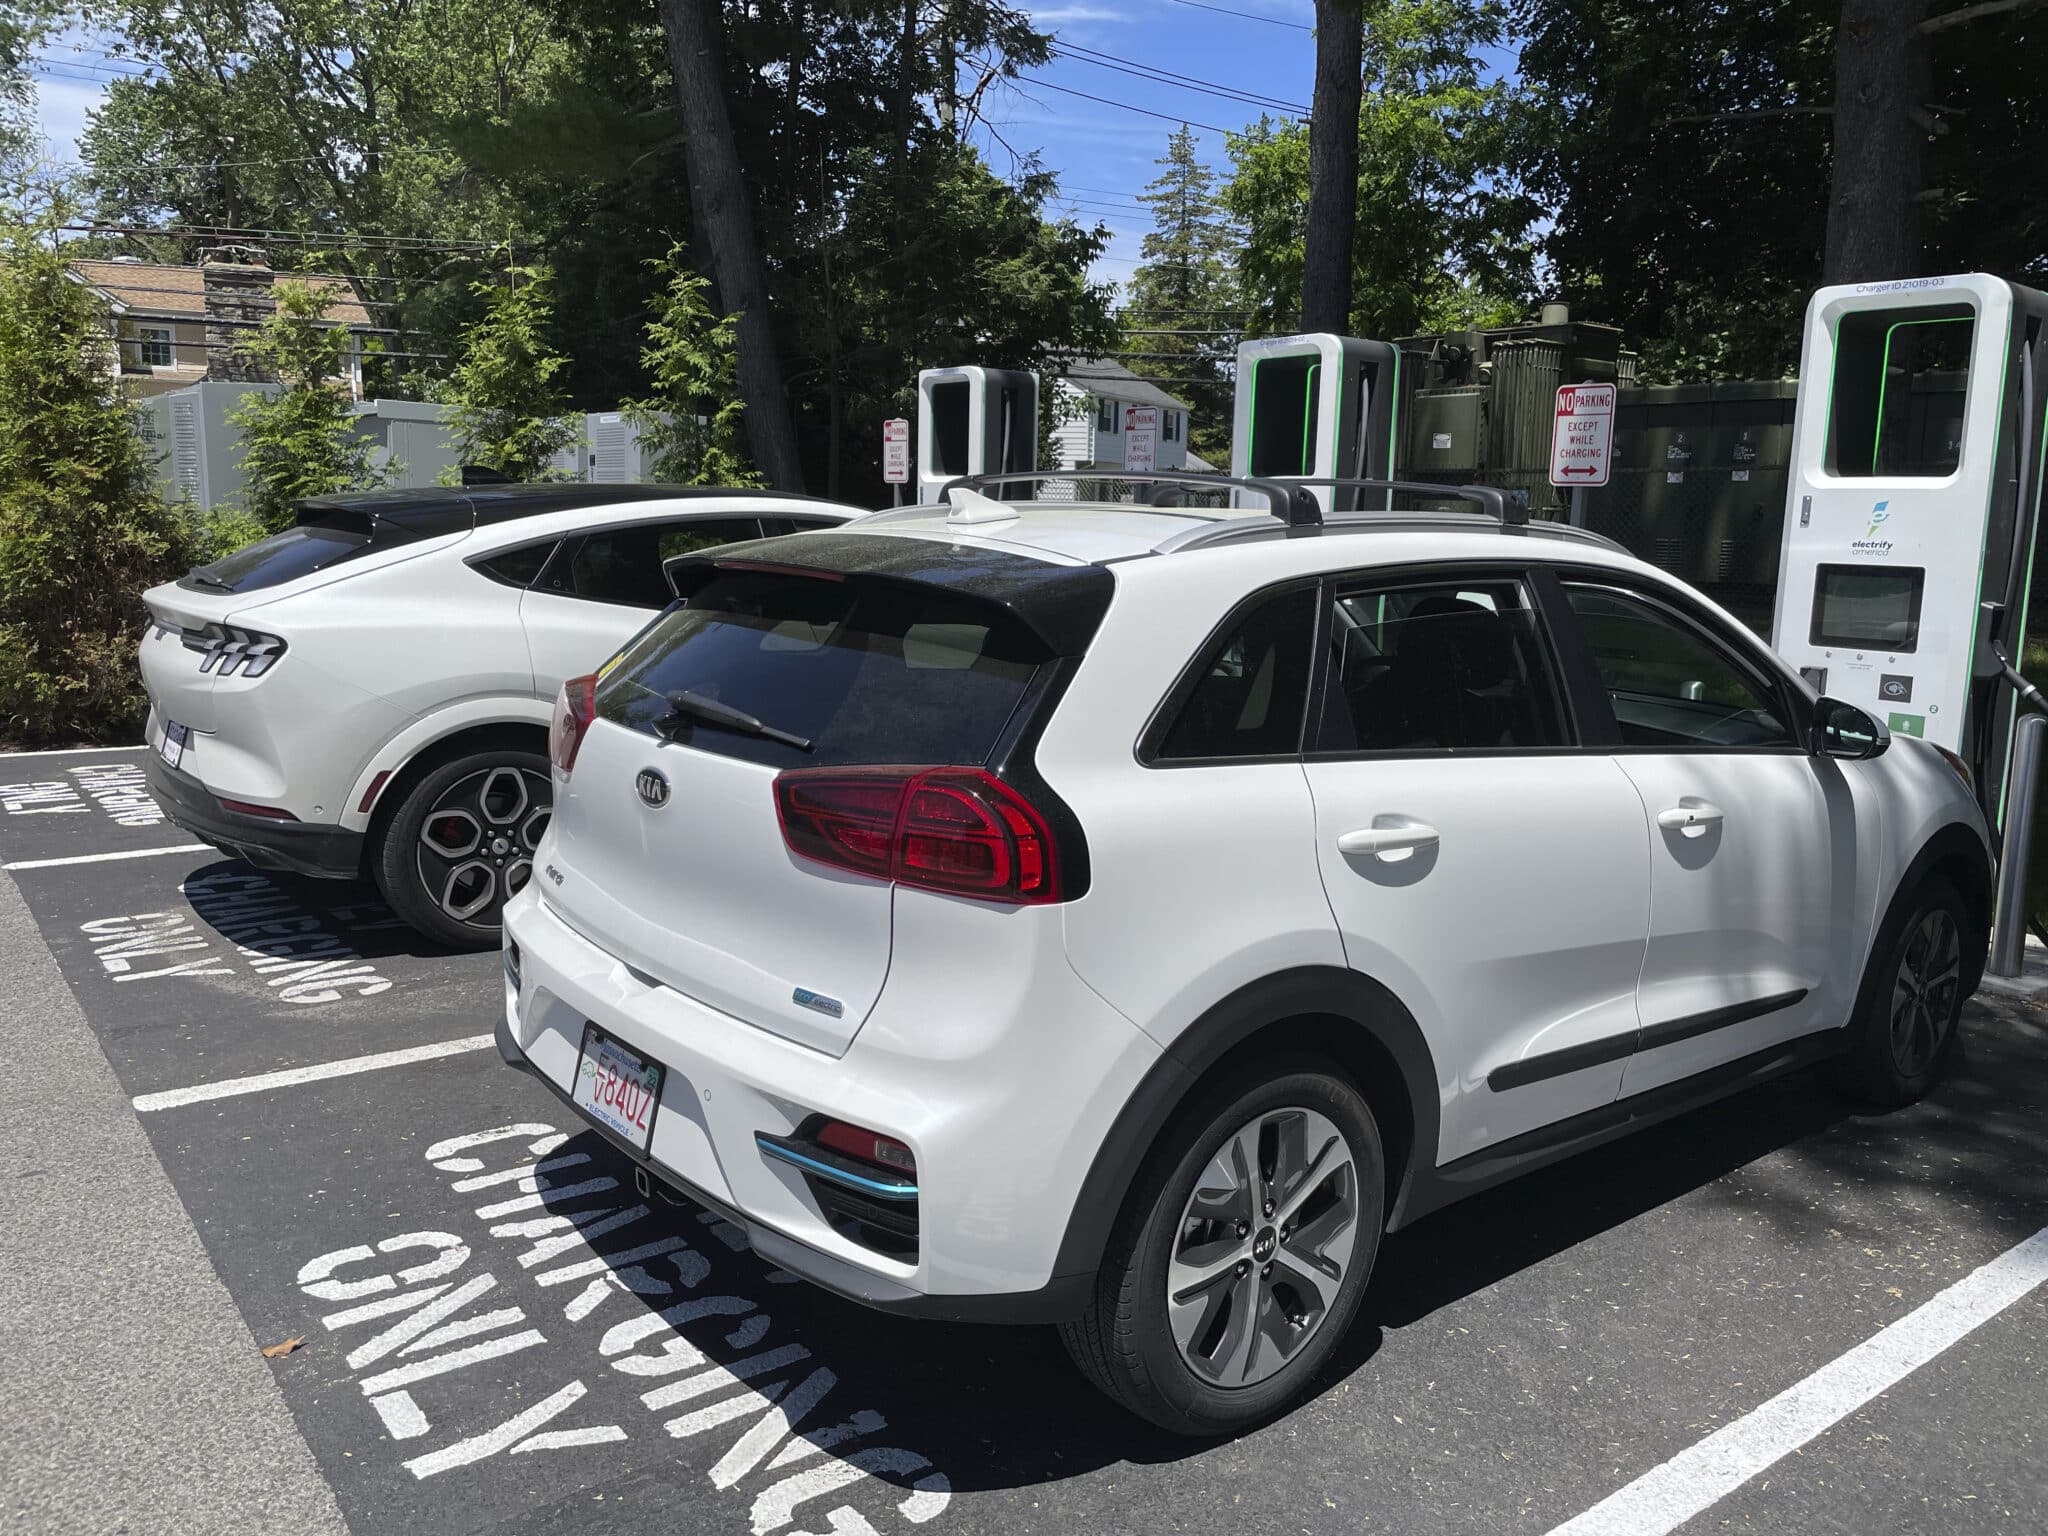 Photo by: STRF/STAR MAX/IPx 2022 6/5/22 An Electric Vehicle Charging Station is seen on 6/5/22 in New Rochelle, New York.